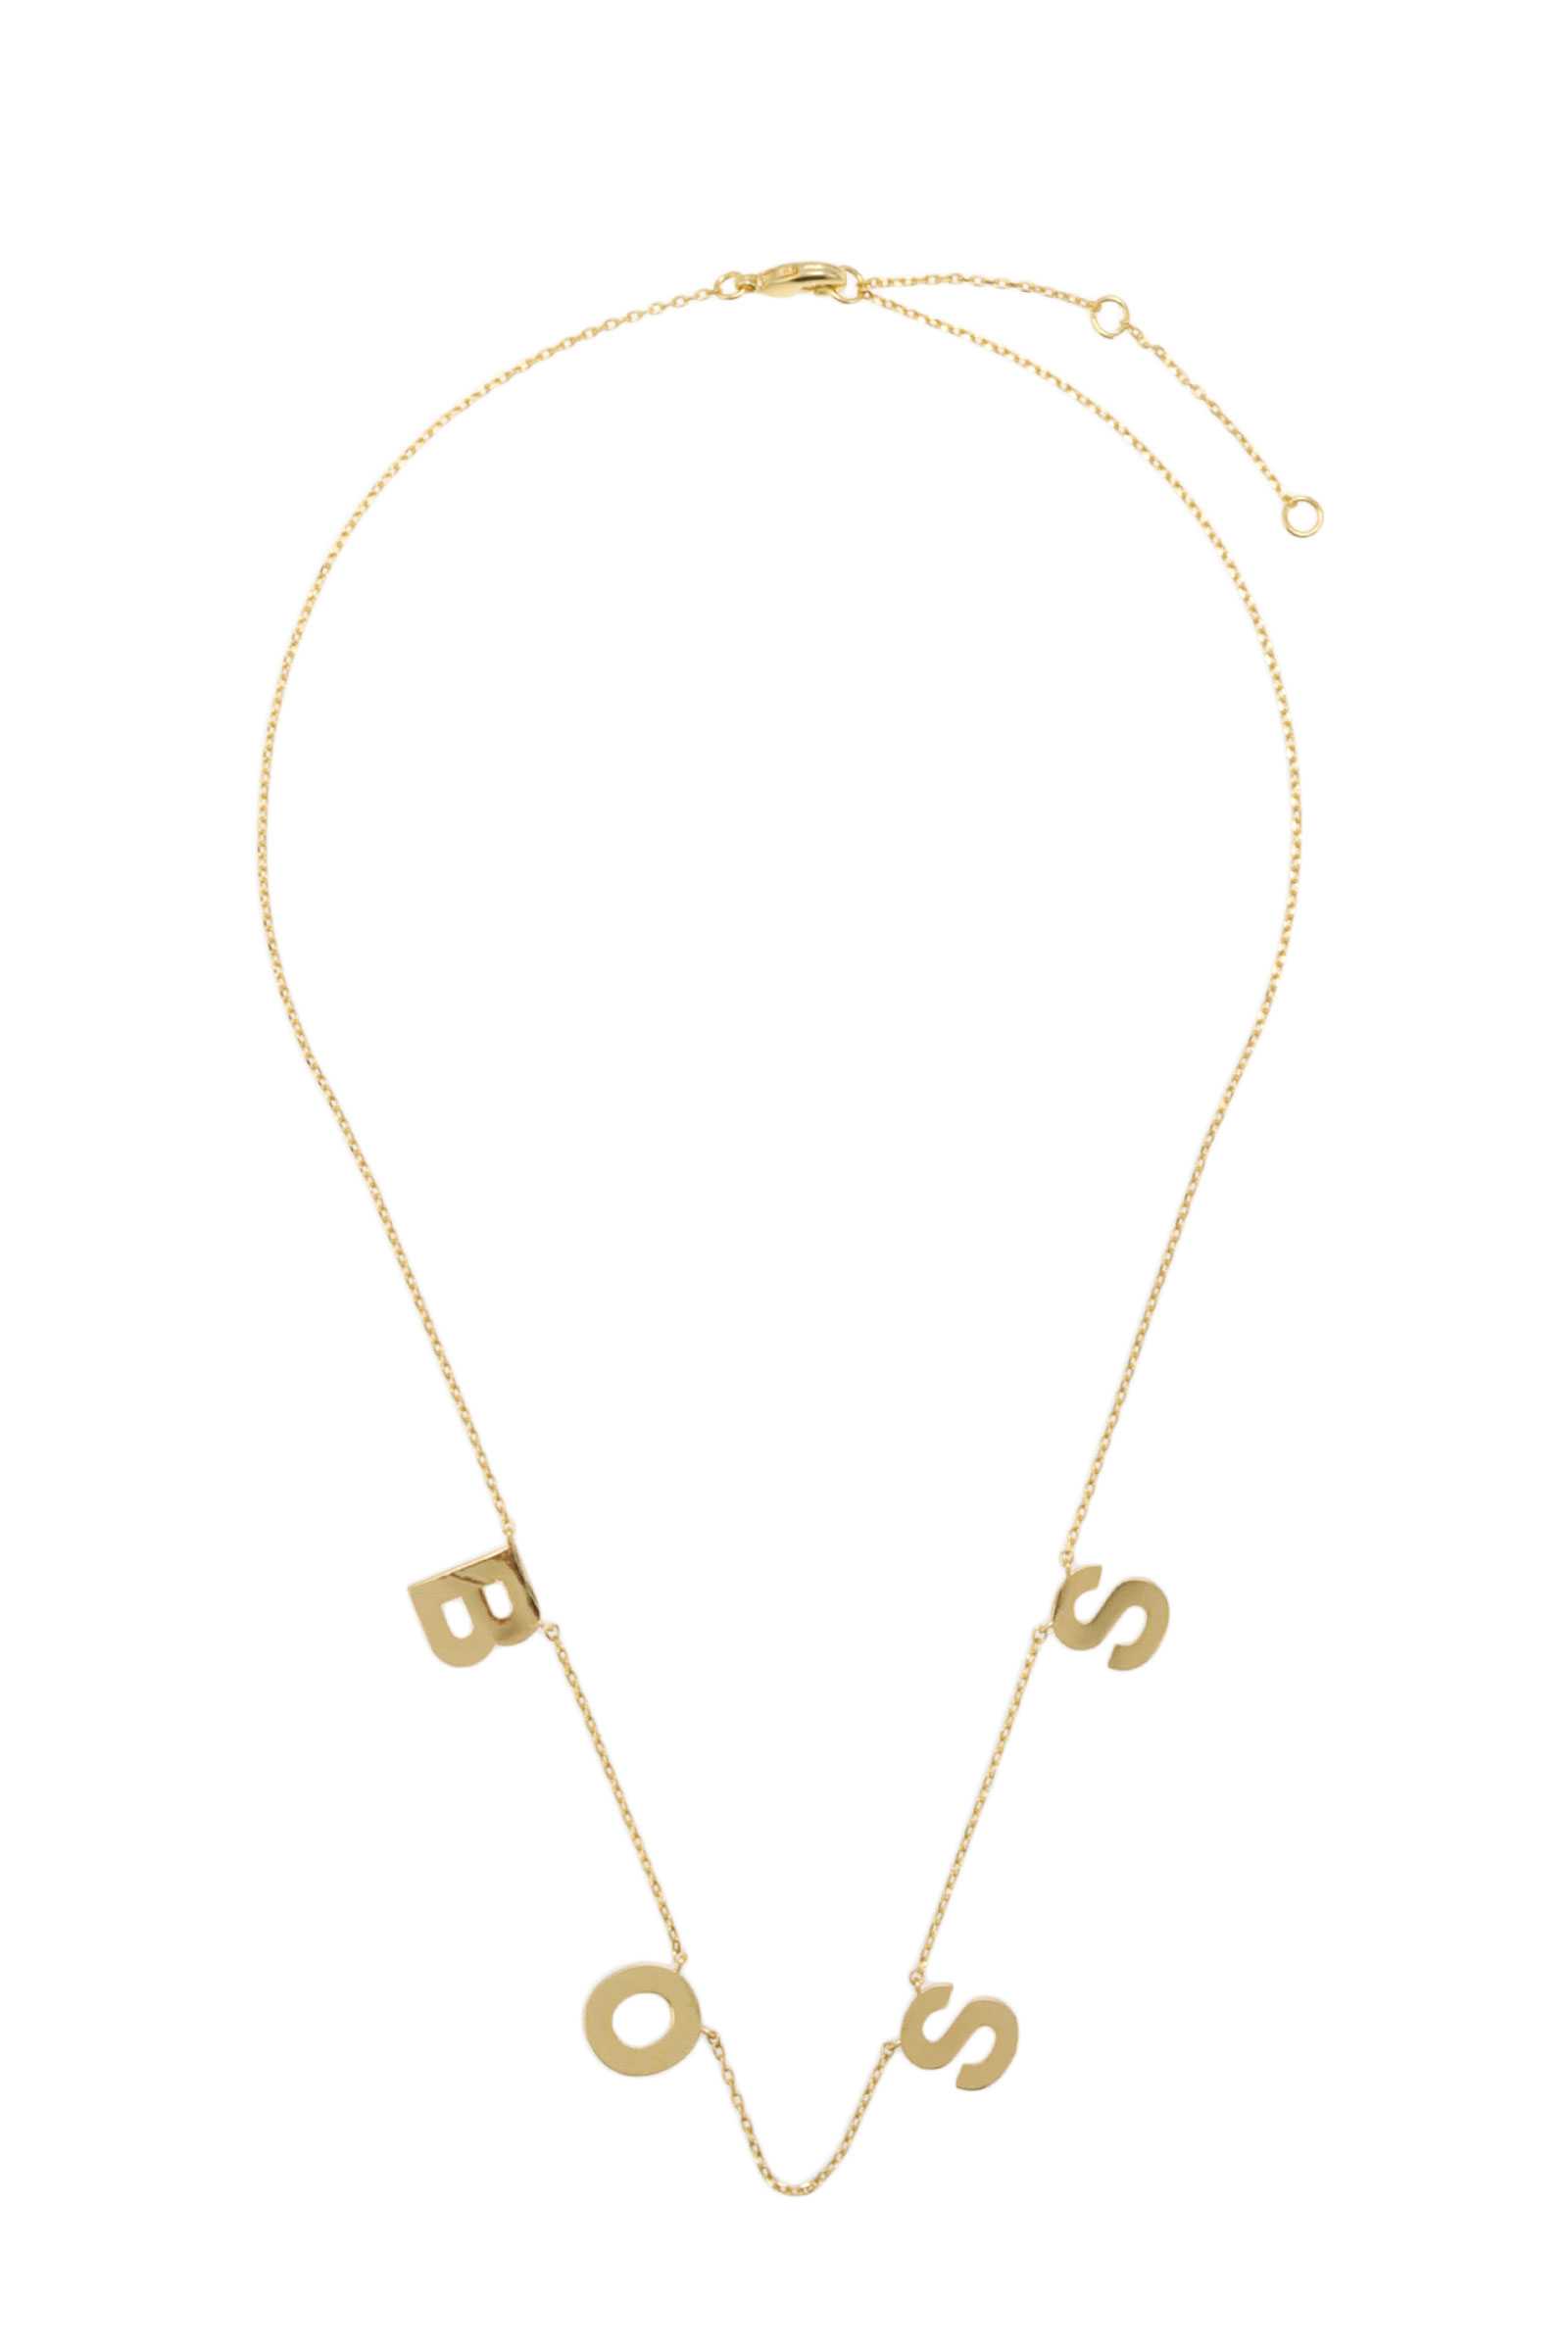 BOSS Linked Gold Dipped Necklace